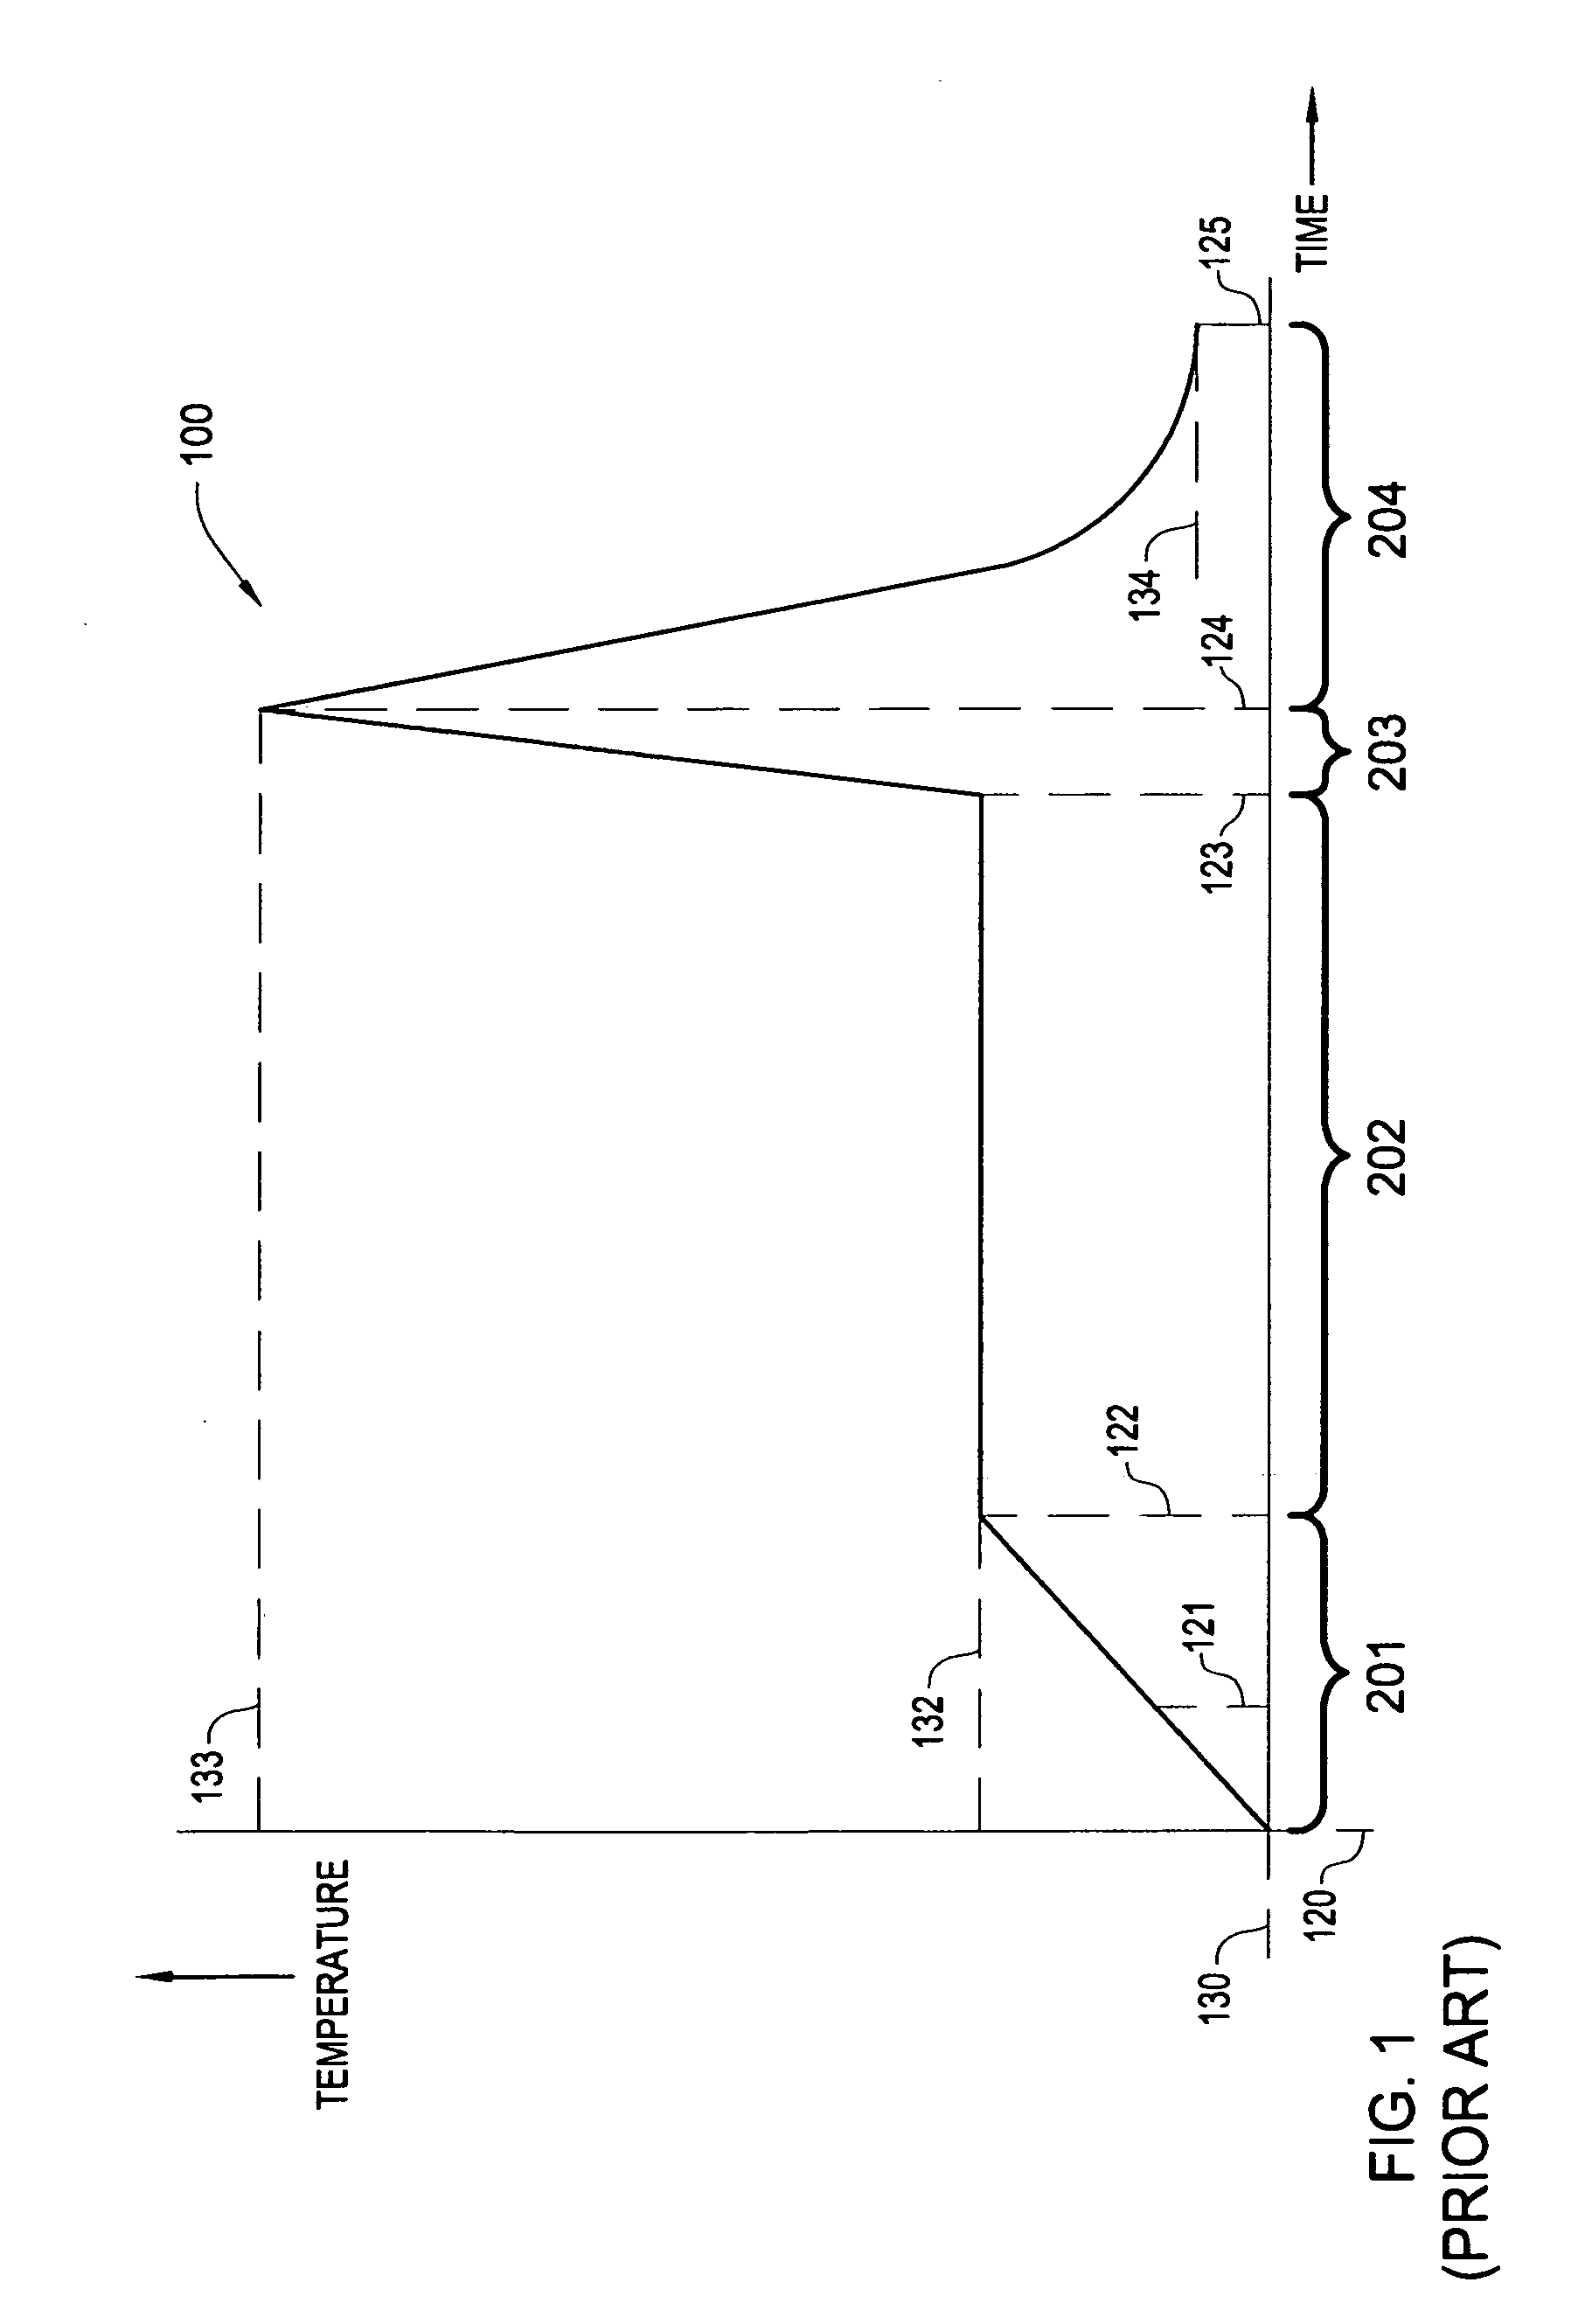 Adaptive control method for rapid thermal processing of a substrate